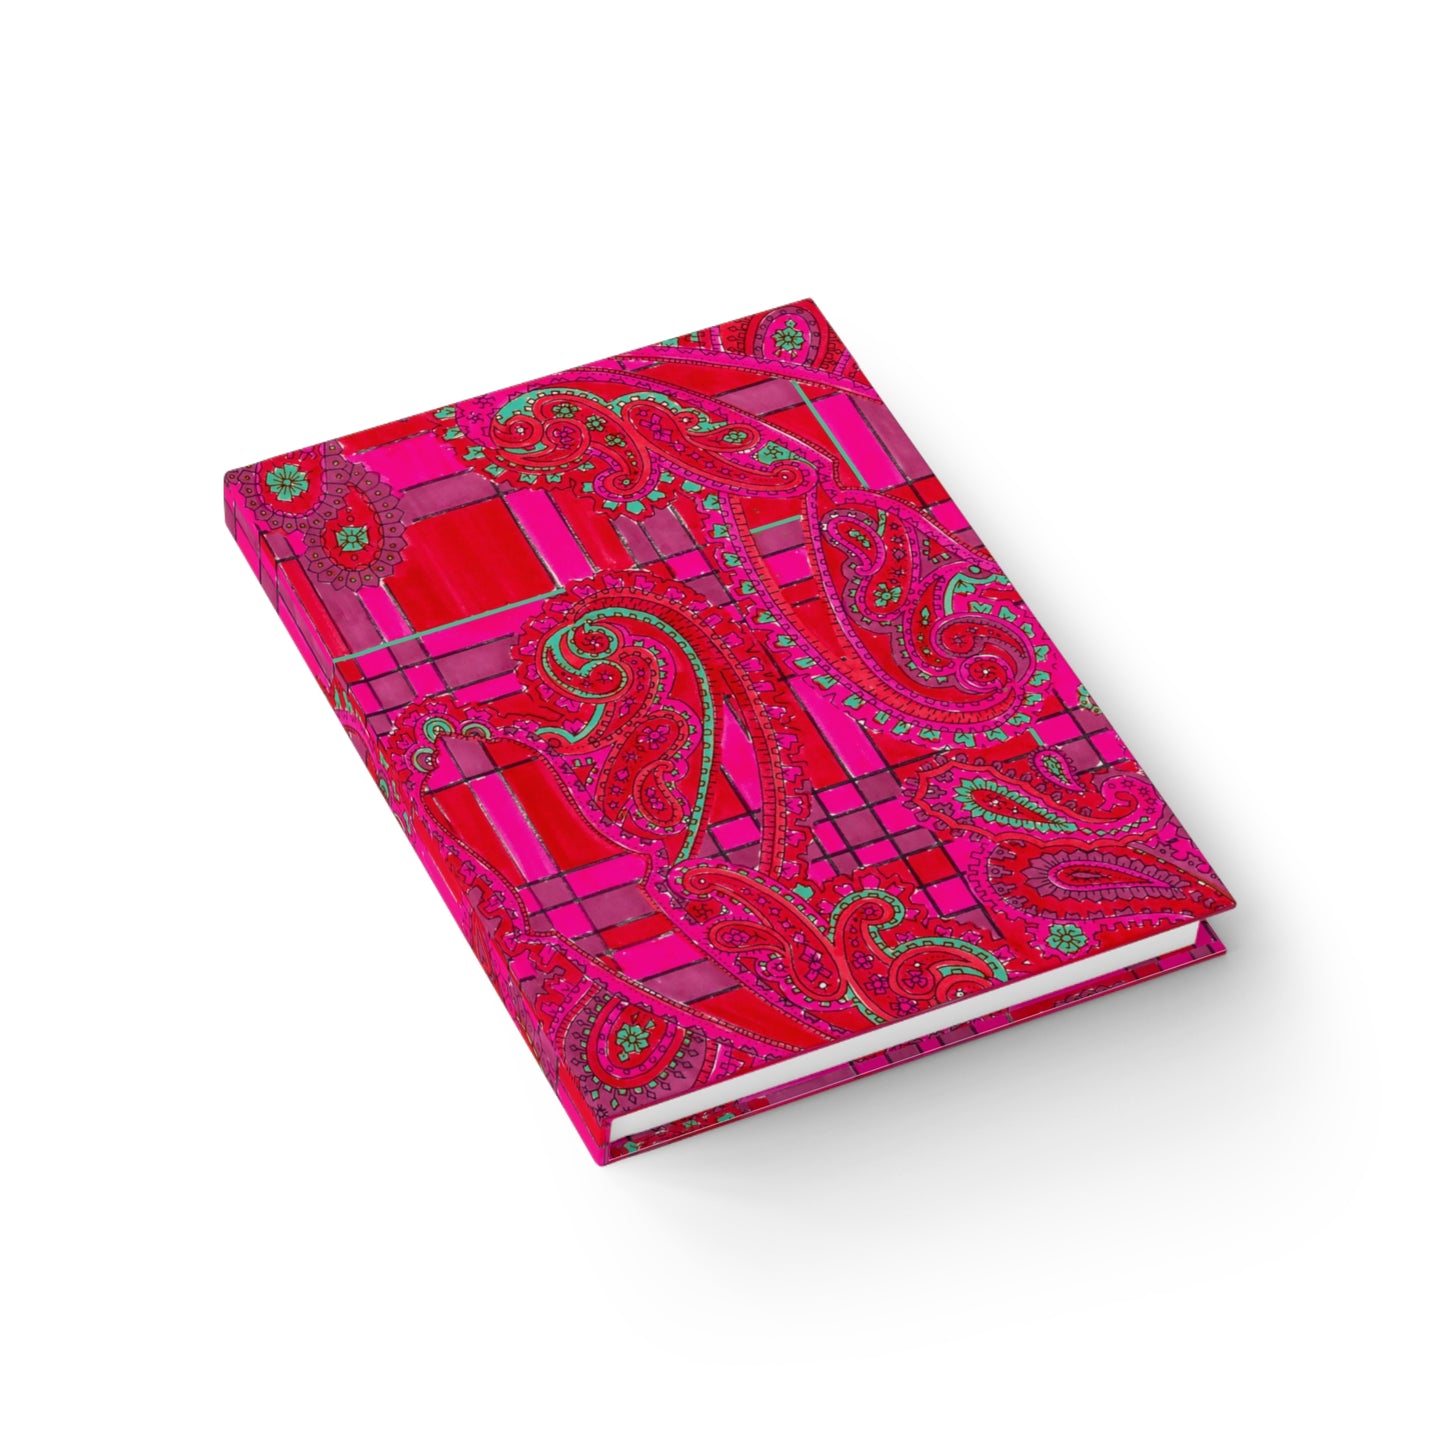 Bright Fuscia and Red Poppy Paisley on Plaid Journal